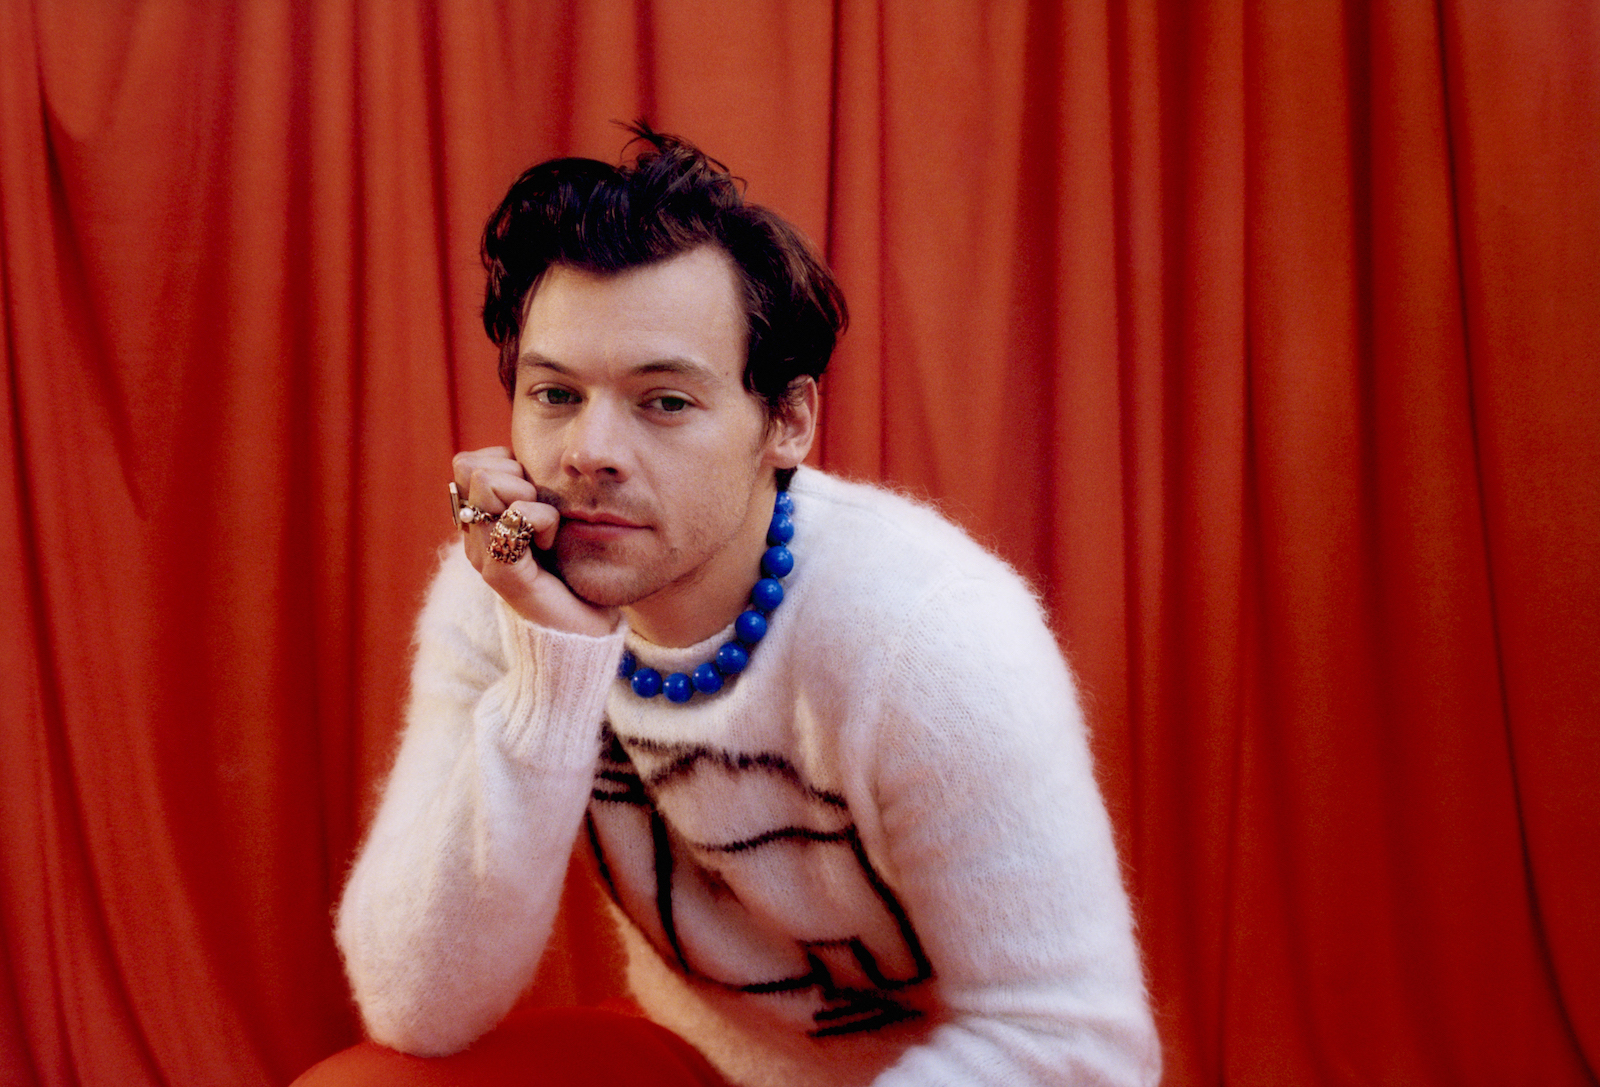 Harry Styles Plots U.S. Residency Tour for 'Harry's House'